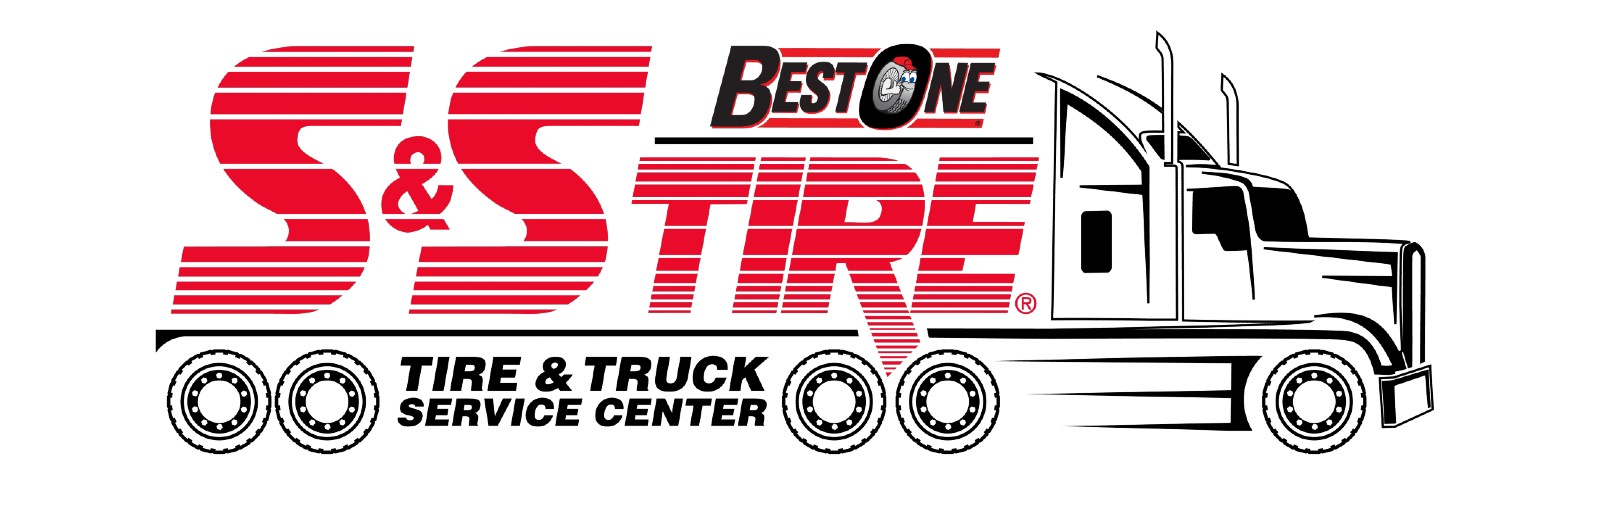 Best One / S&S Tire Commercial Logo